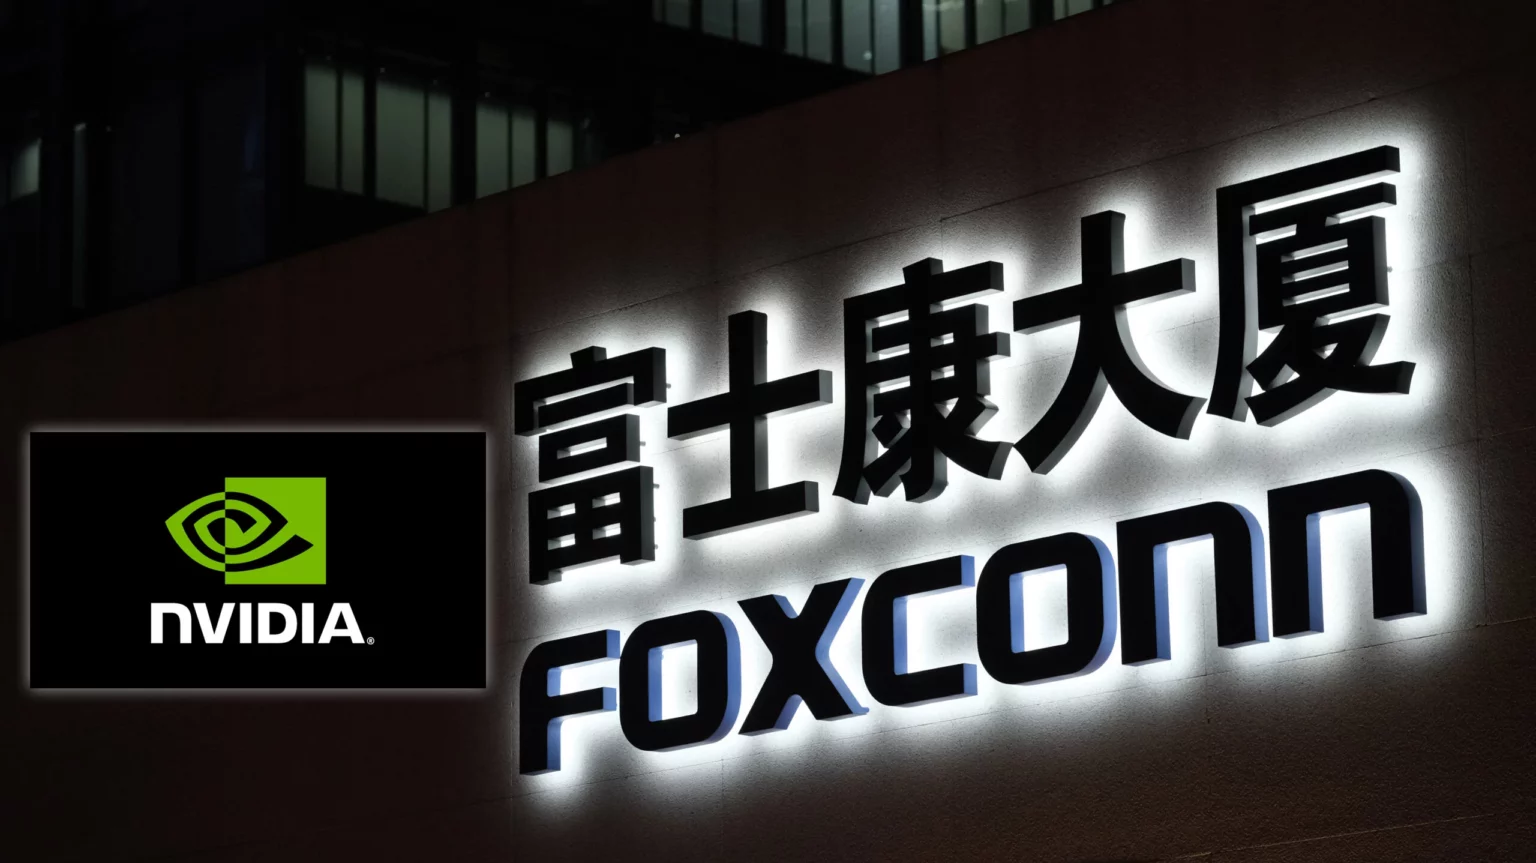 tech-giants-foxconn-and-nvidia-announce-they-are-teaming-up-to-build-ai-factories